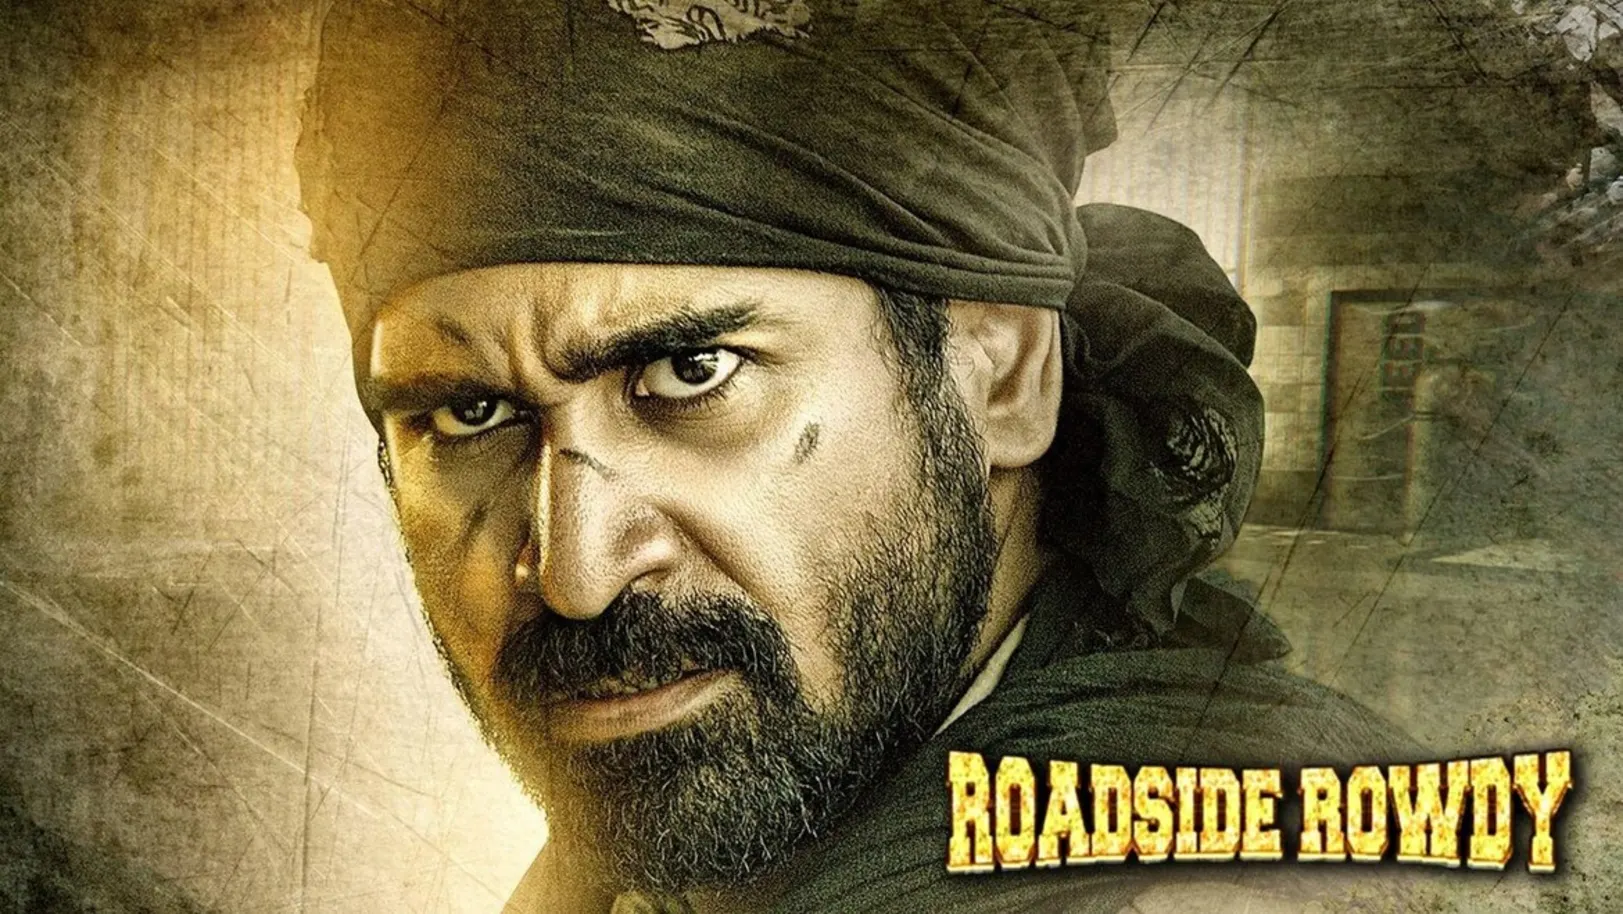 Roadside Rowdy Streaming Now On &Pictures